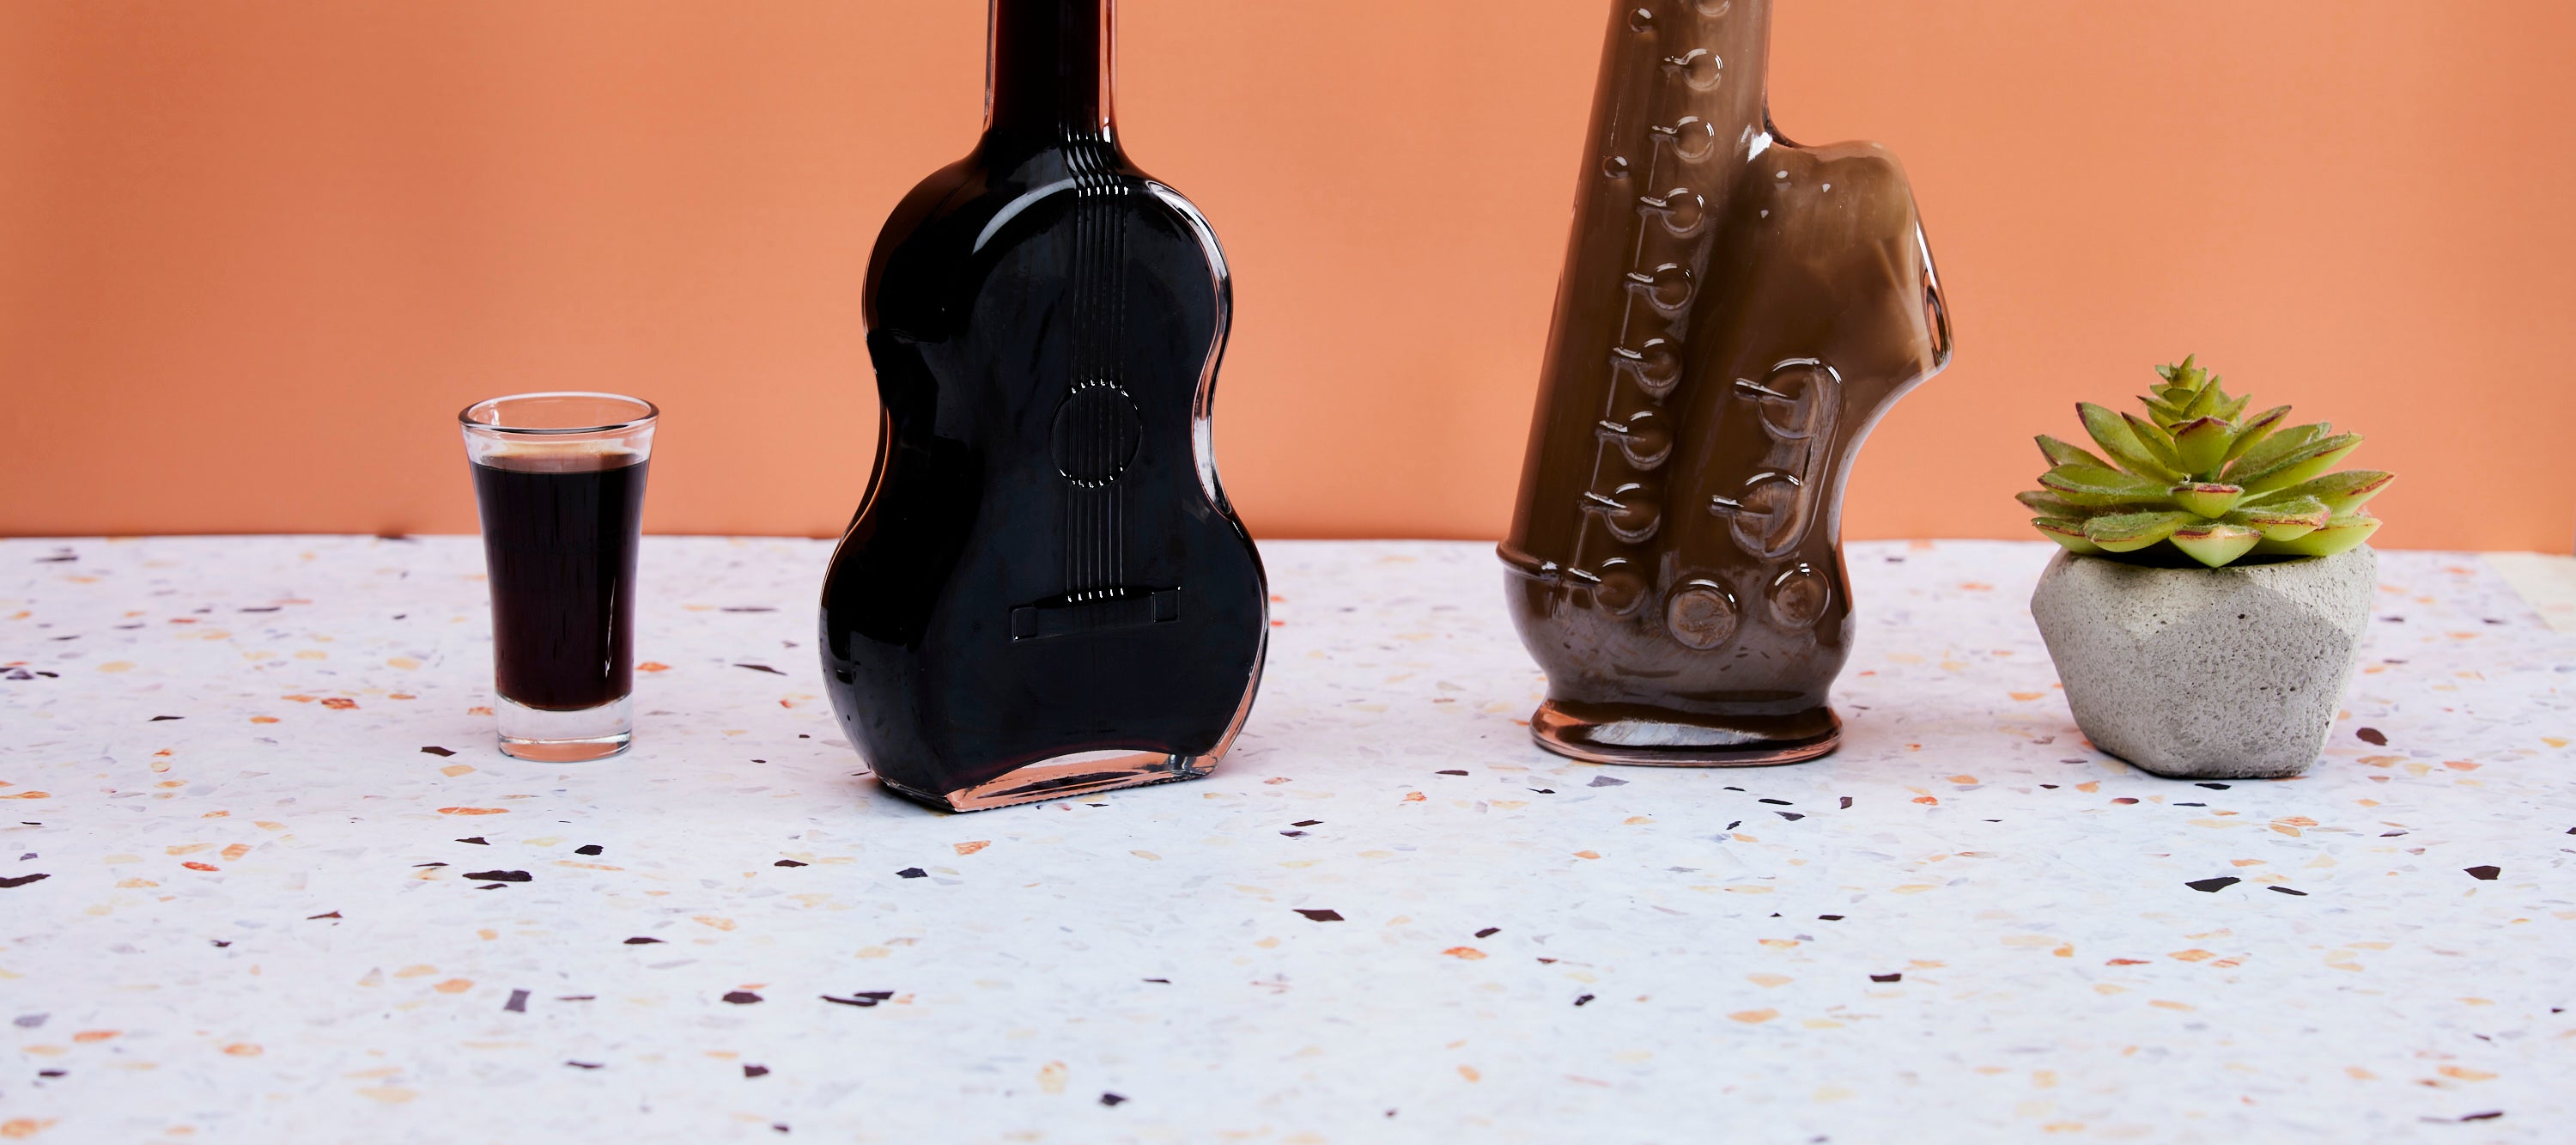 Saxophone Bottle and Chocolate Port Liqueur Gift Box